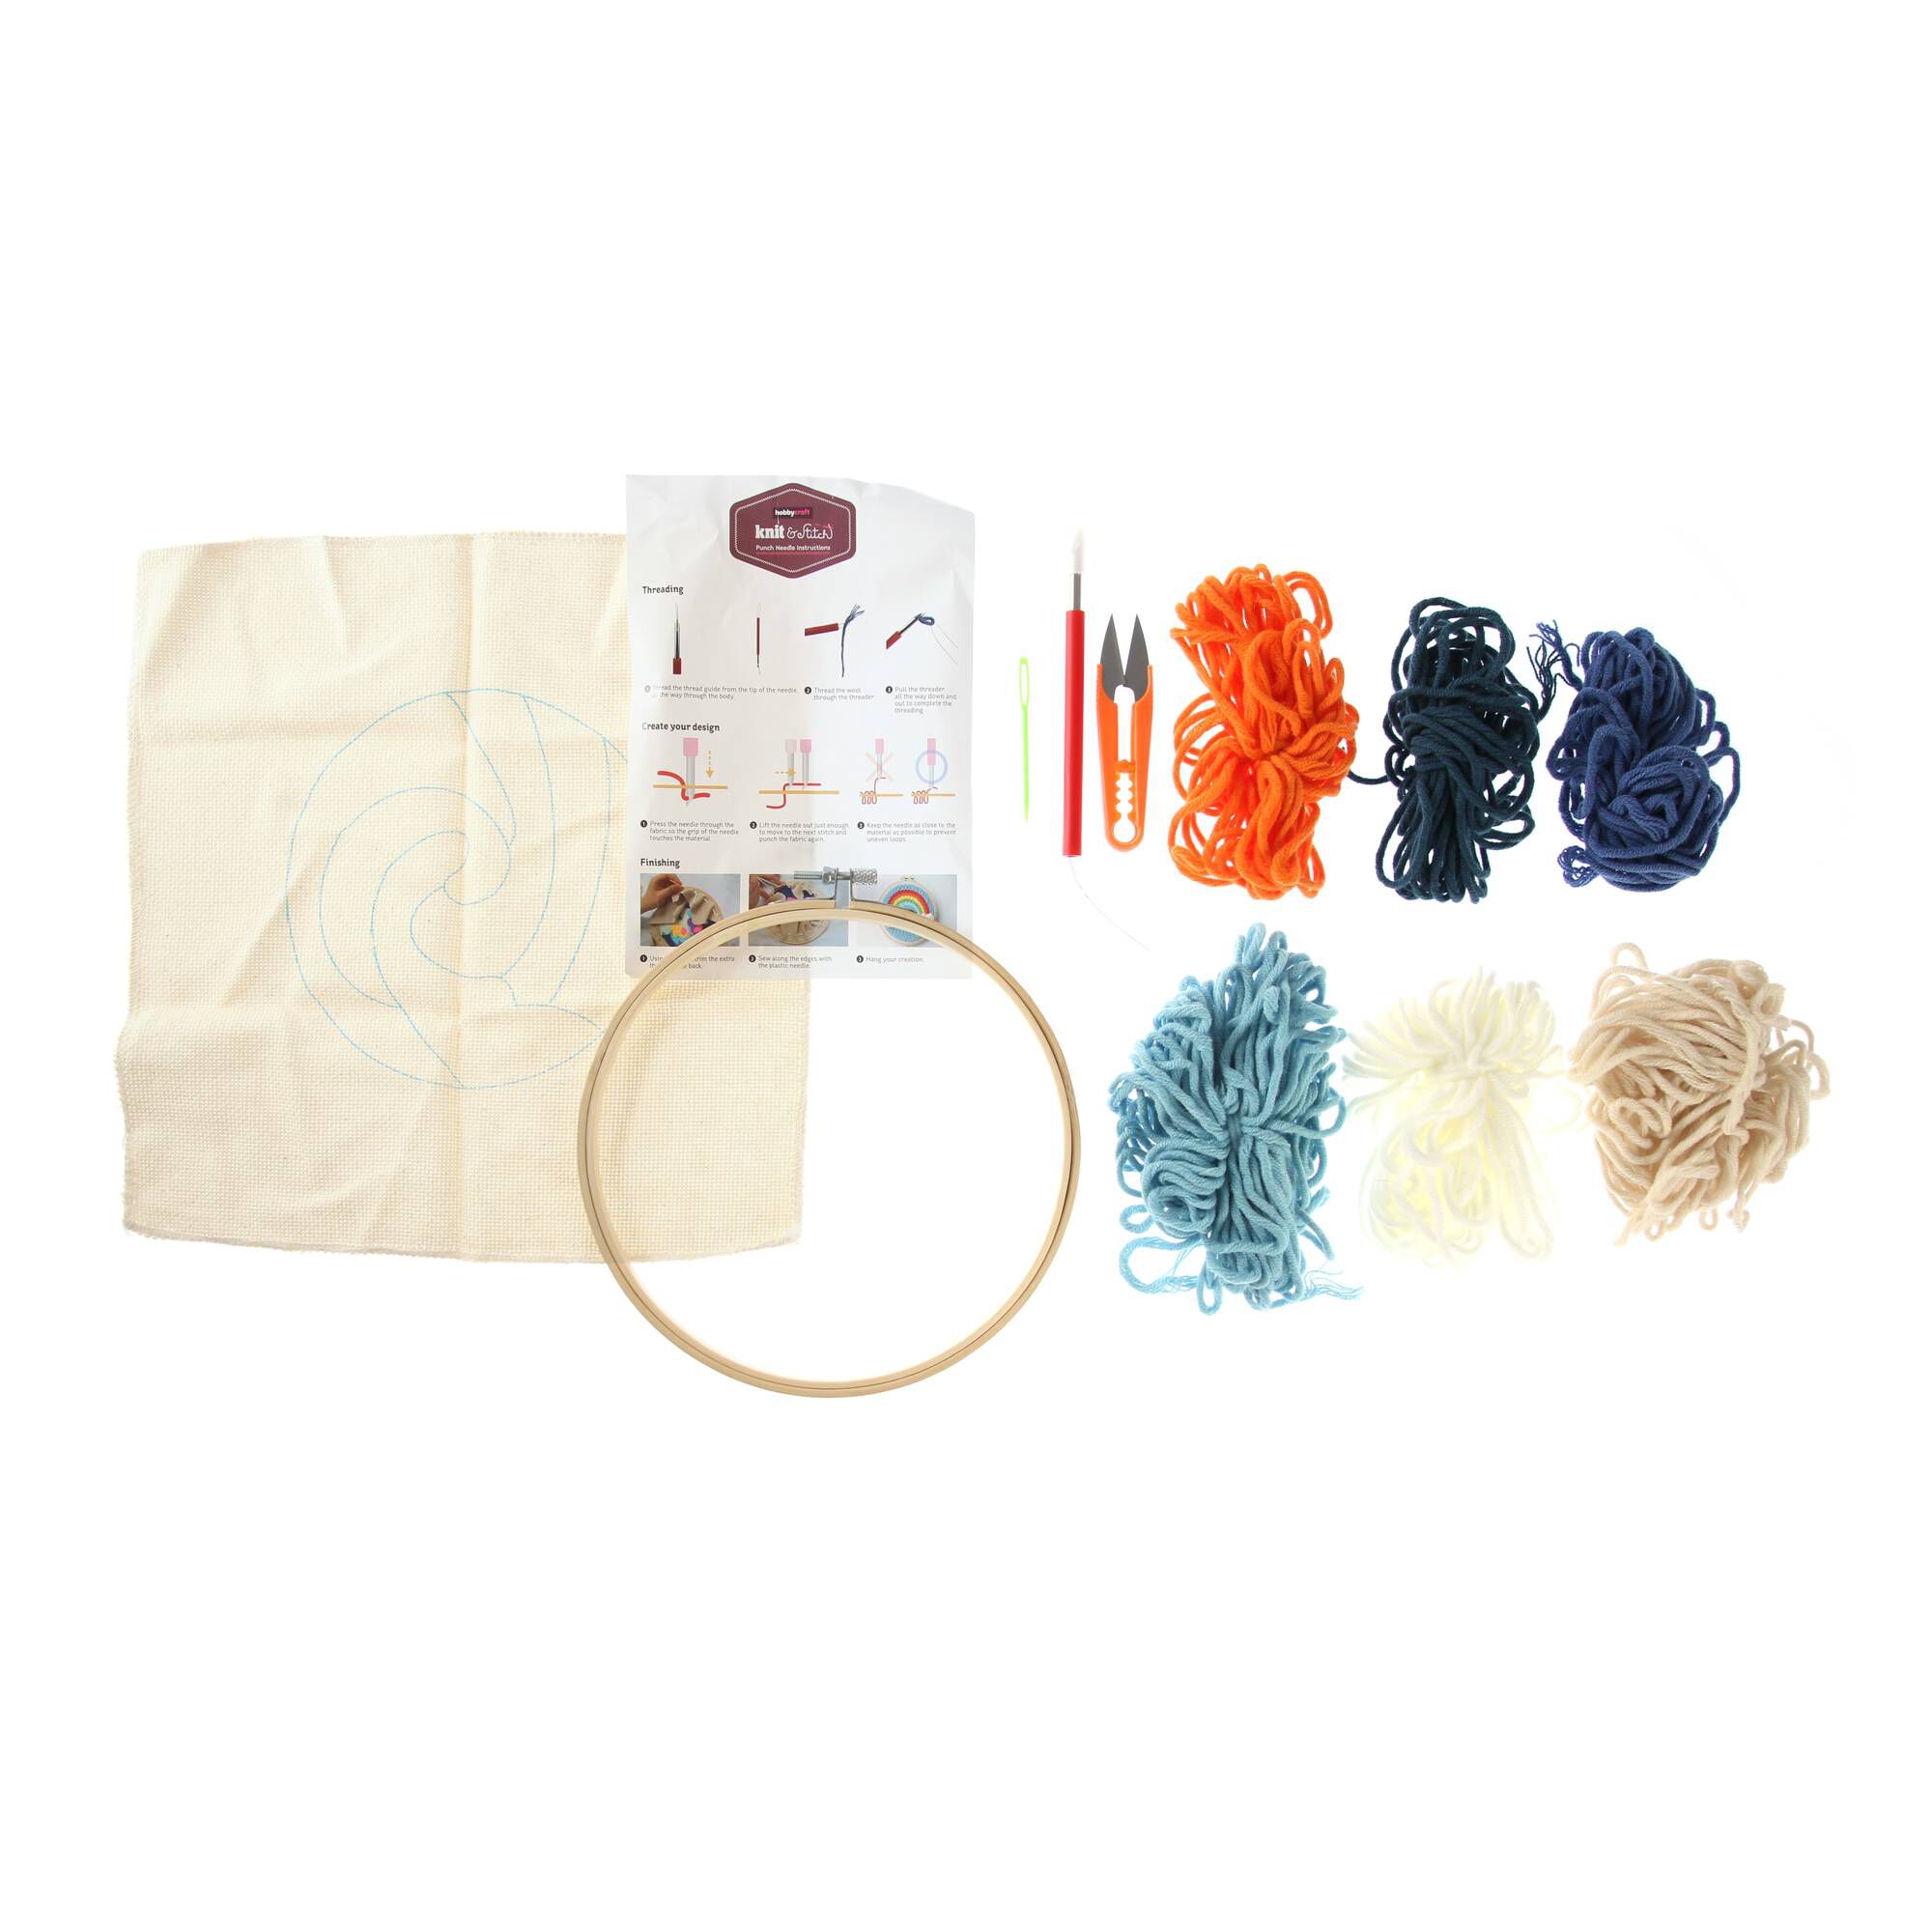 Wave Embroidery Punch Needle Hoop Kit 20cm | Hobbycraft